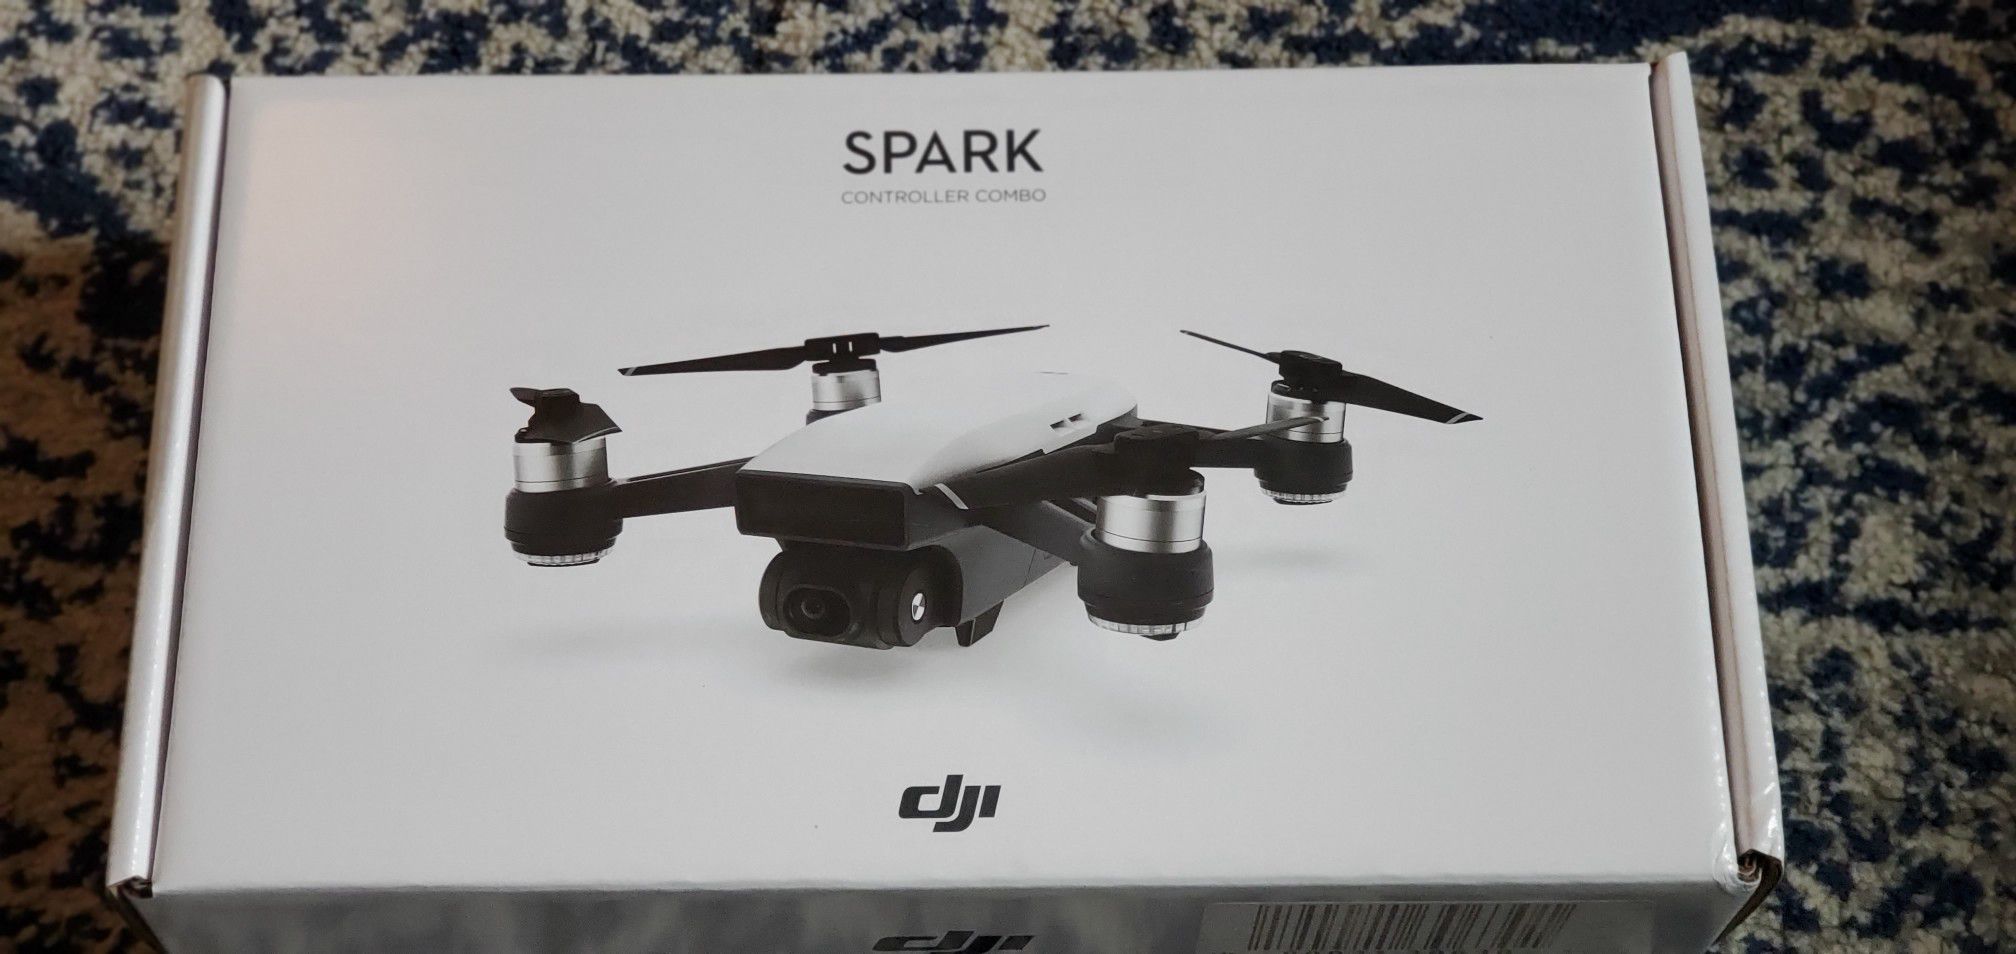 Brand New DJI SPARK Drone with Brand new DJI Controller